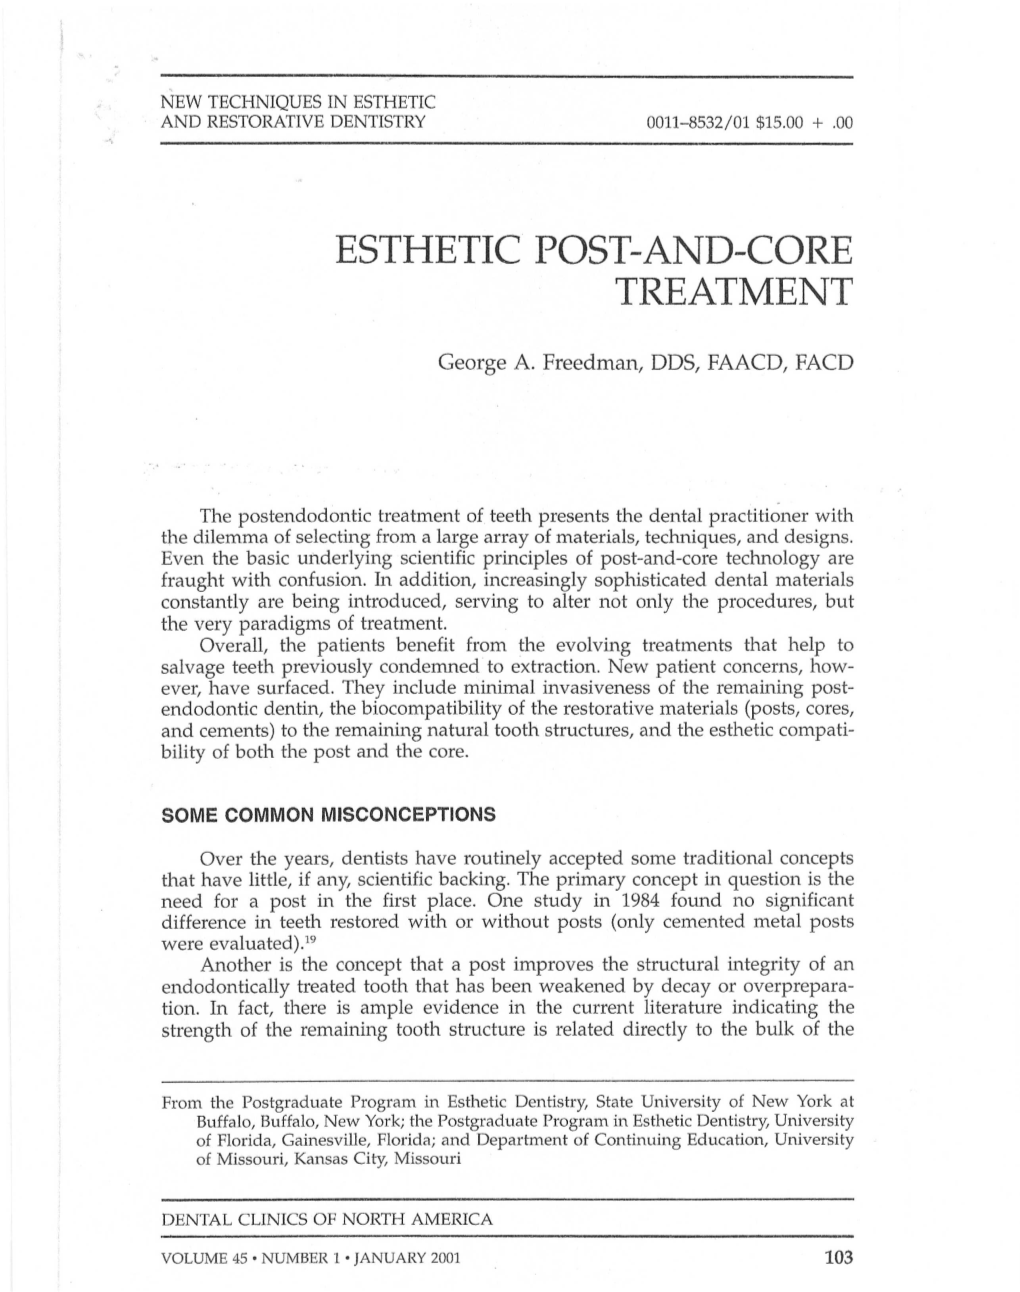 Esthetic Post-And-Core Treatment